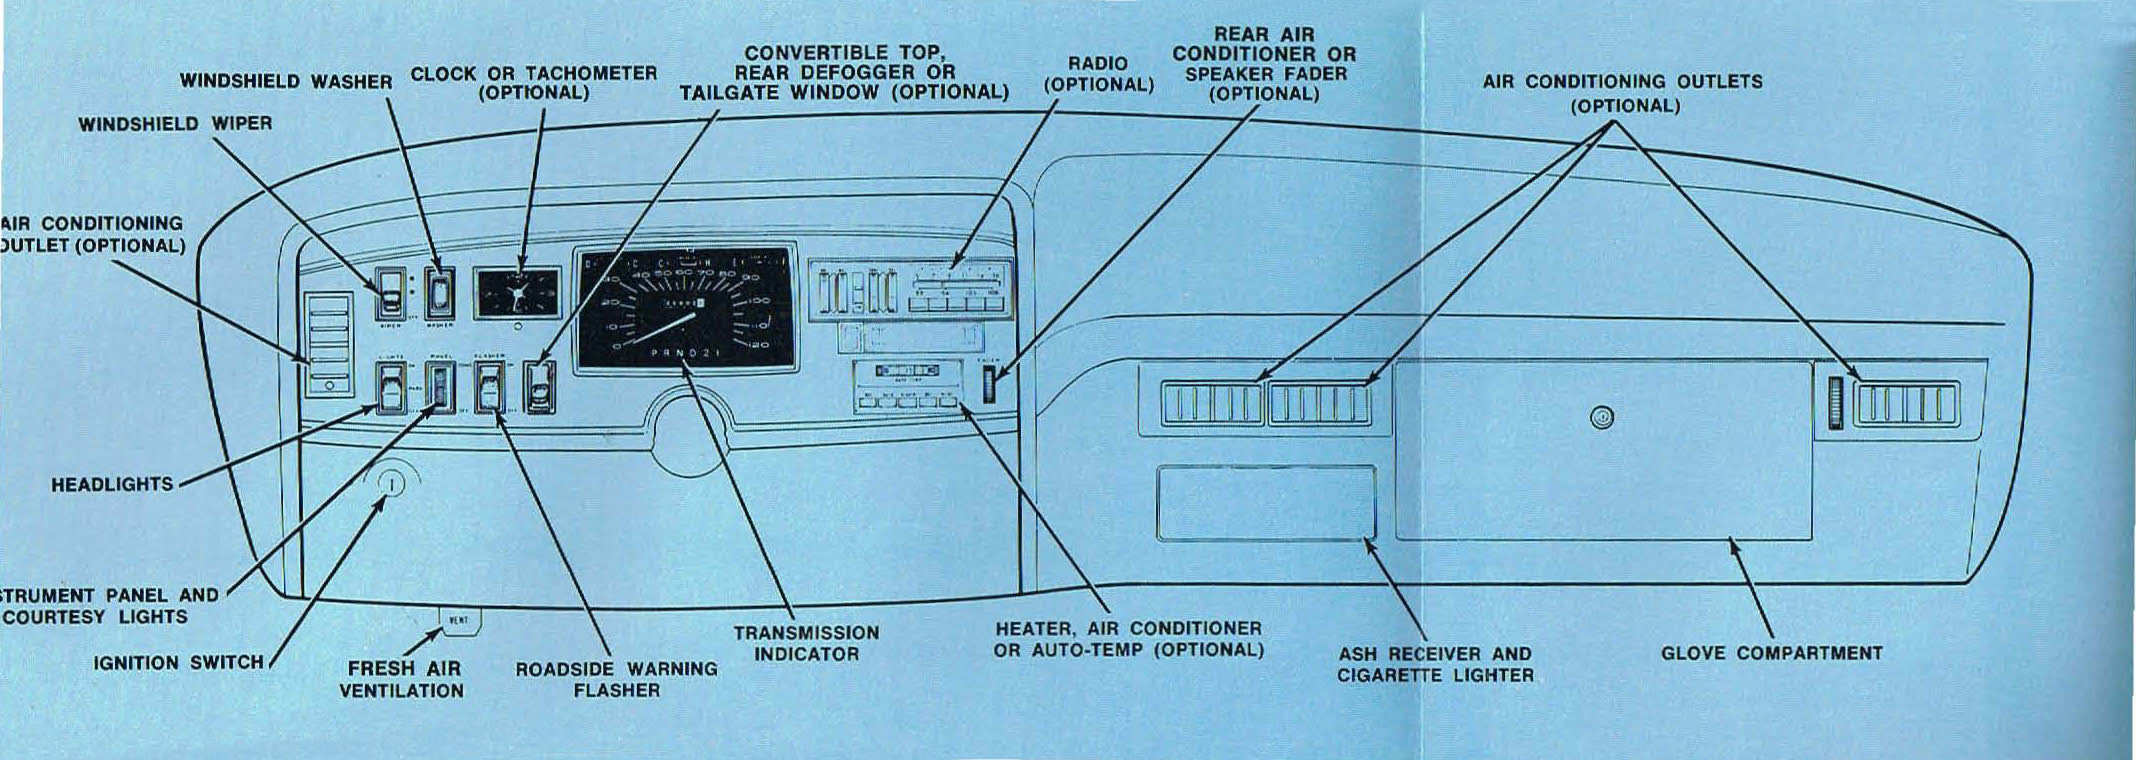 1969_Plymouth_Fury_Owners_Manual-04a-04b